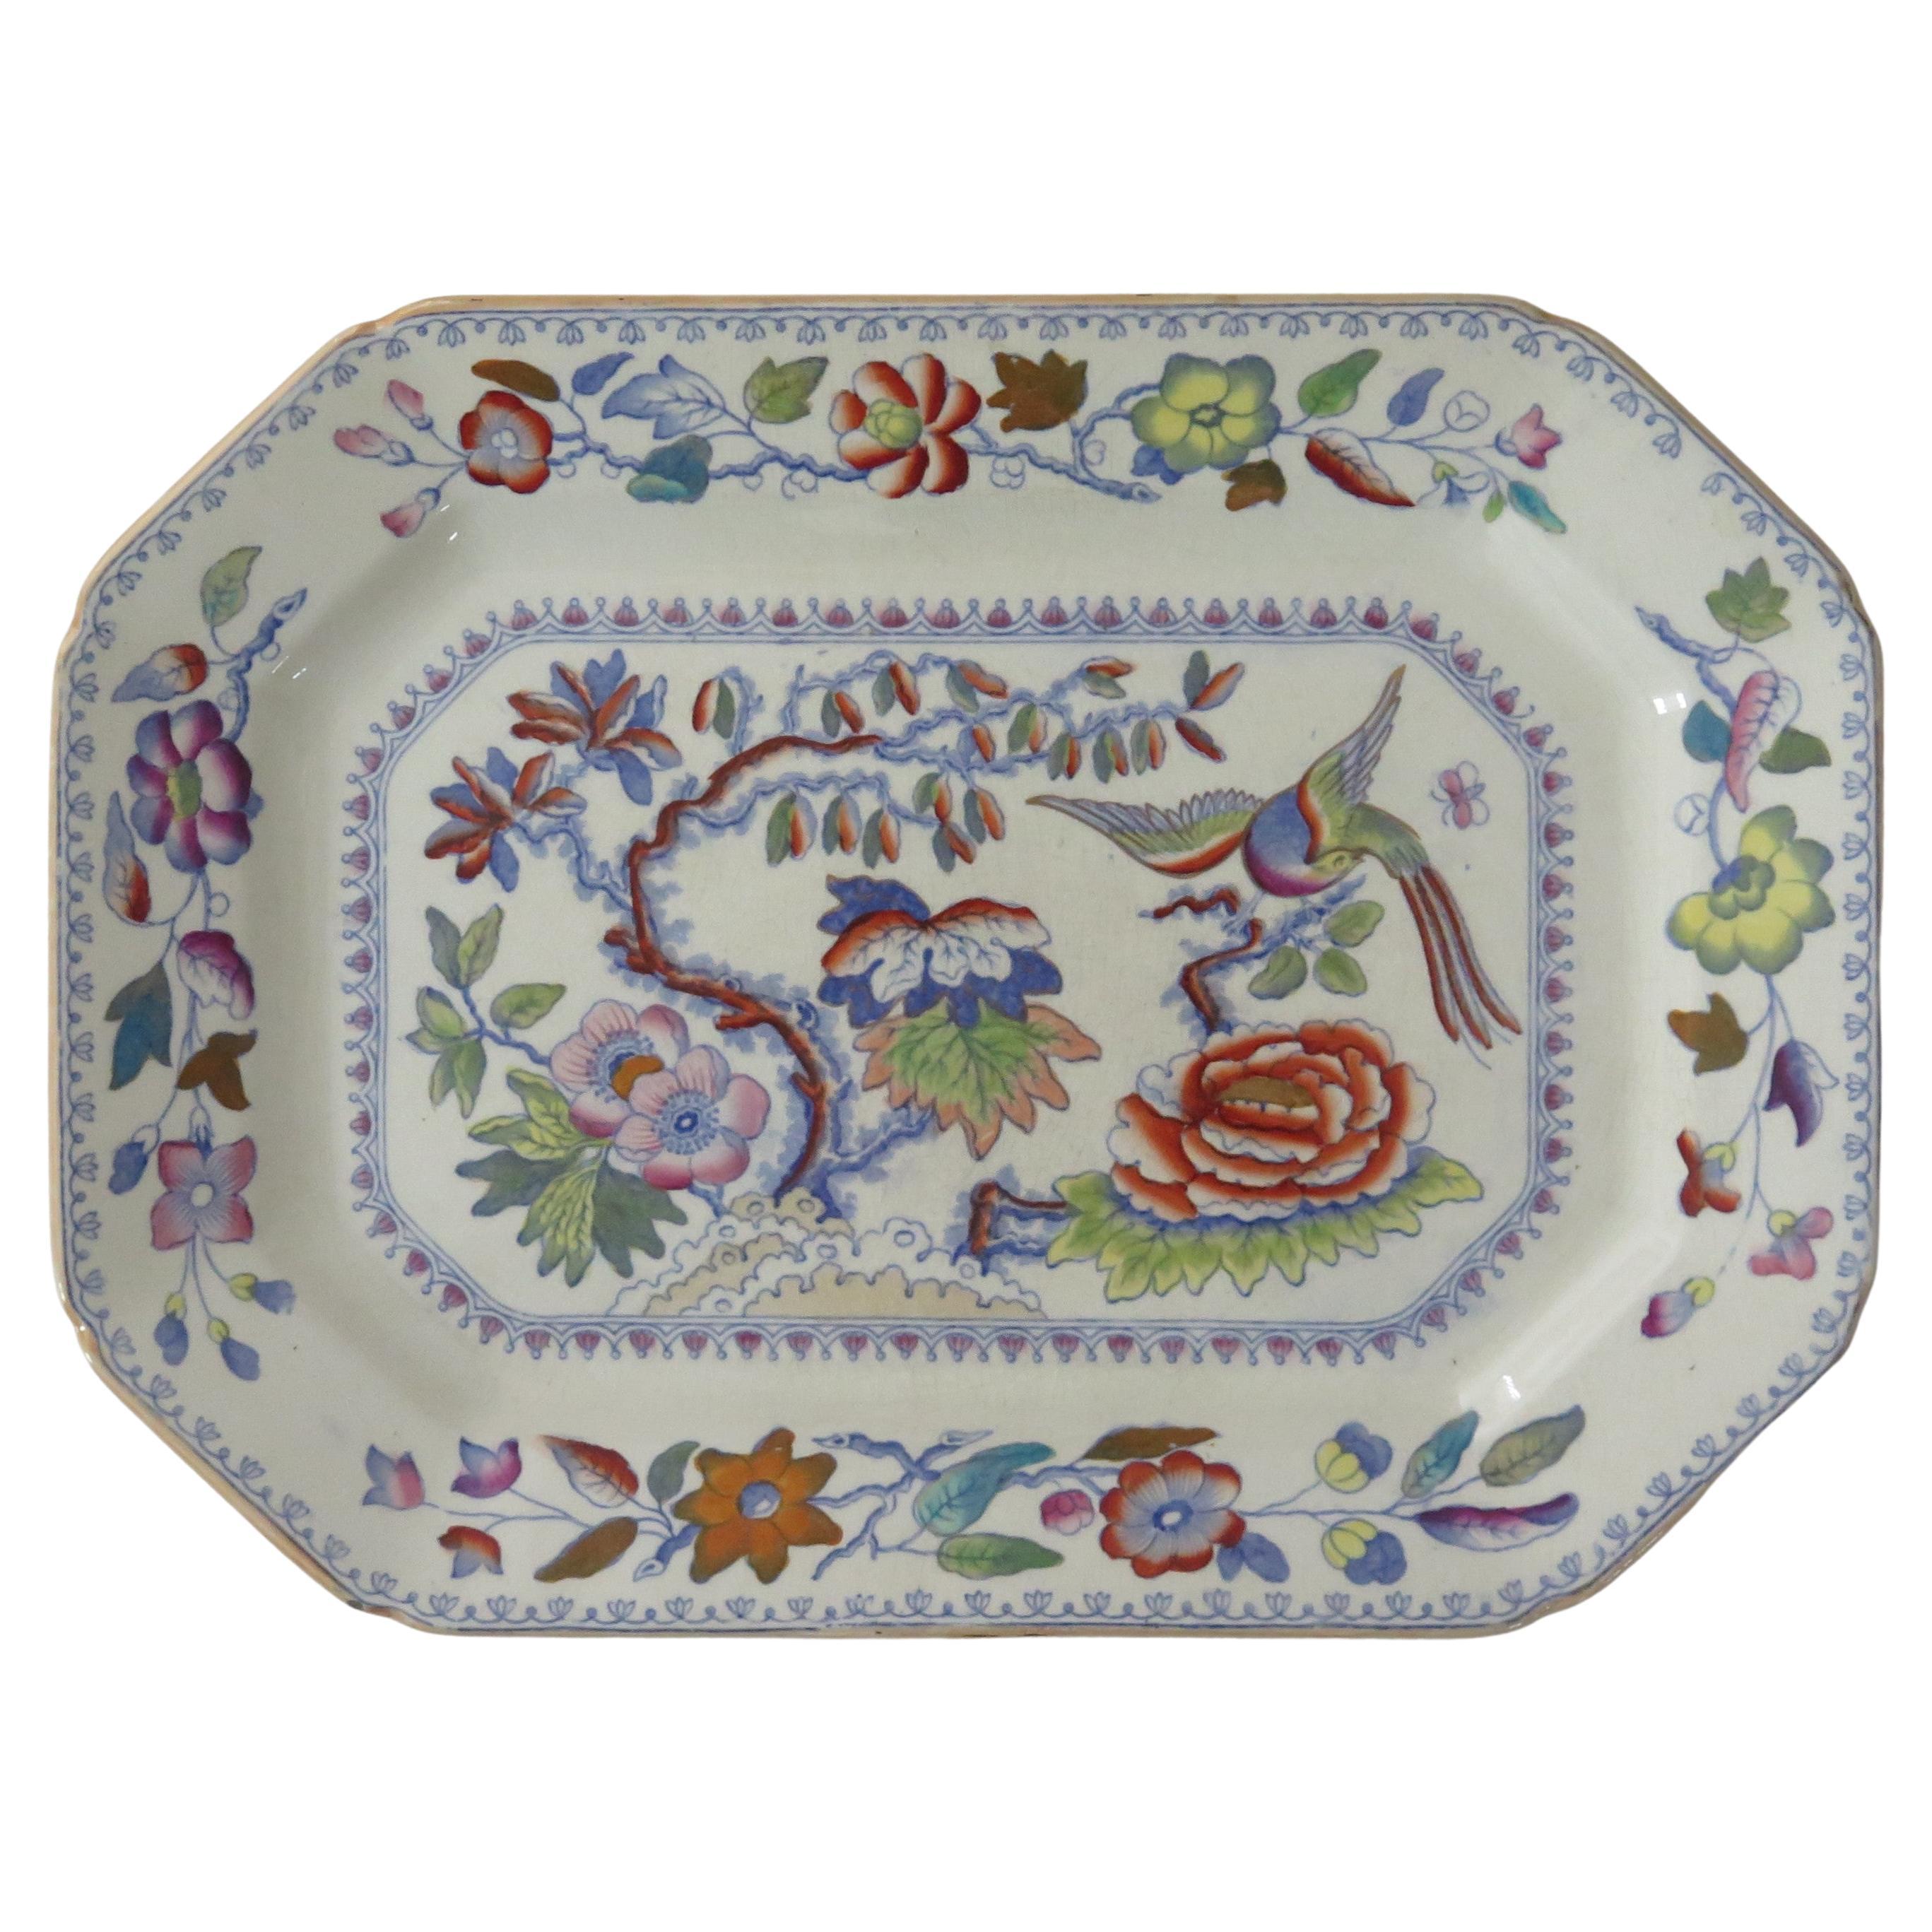 Mason's Ironstone Large Platter or Meat Plate in Flying Bird Pattern, circa 1880 For Sale